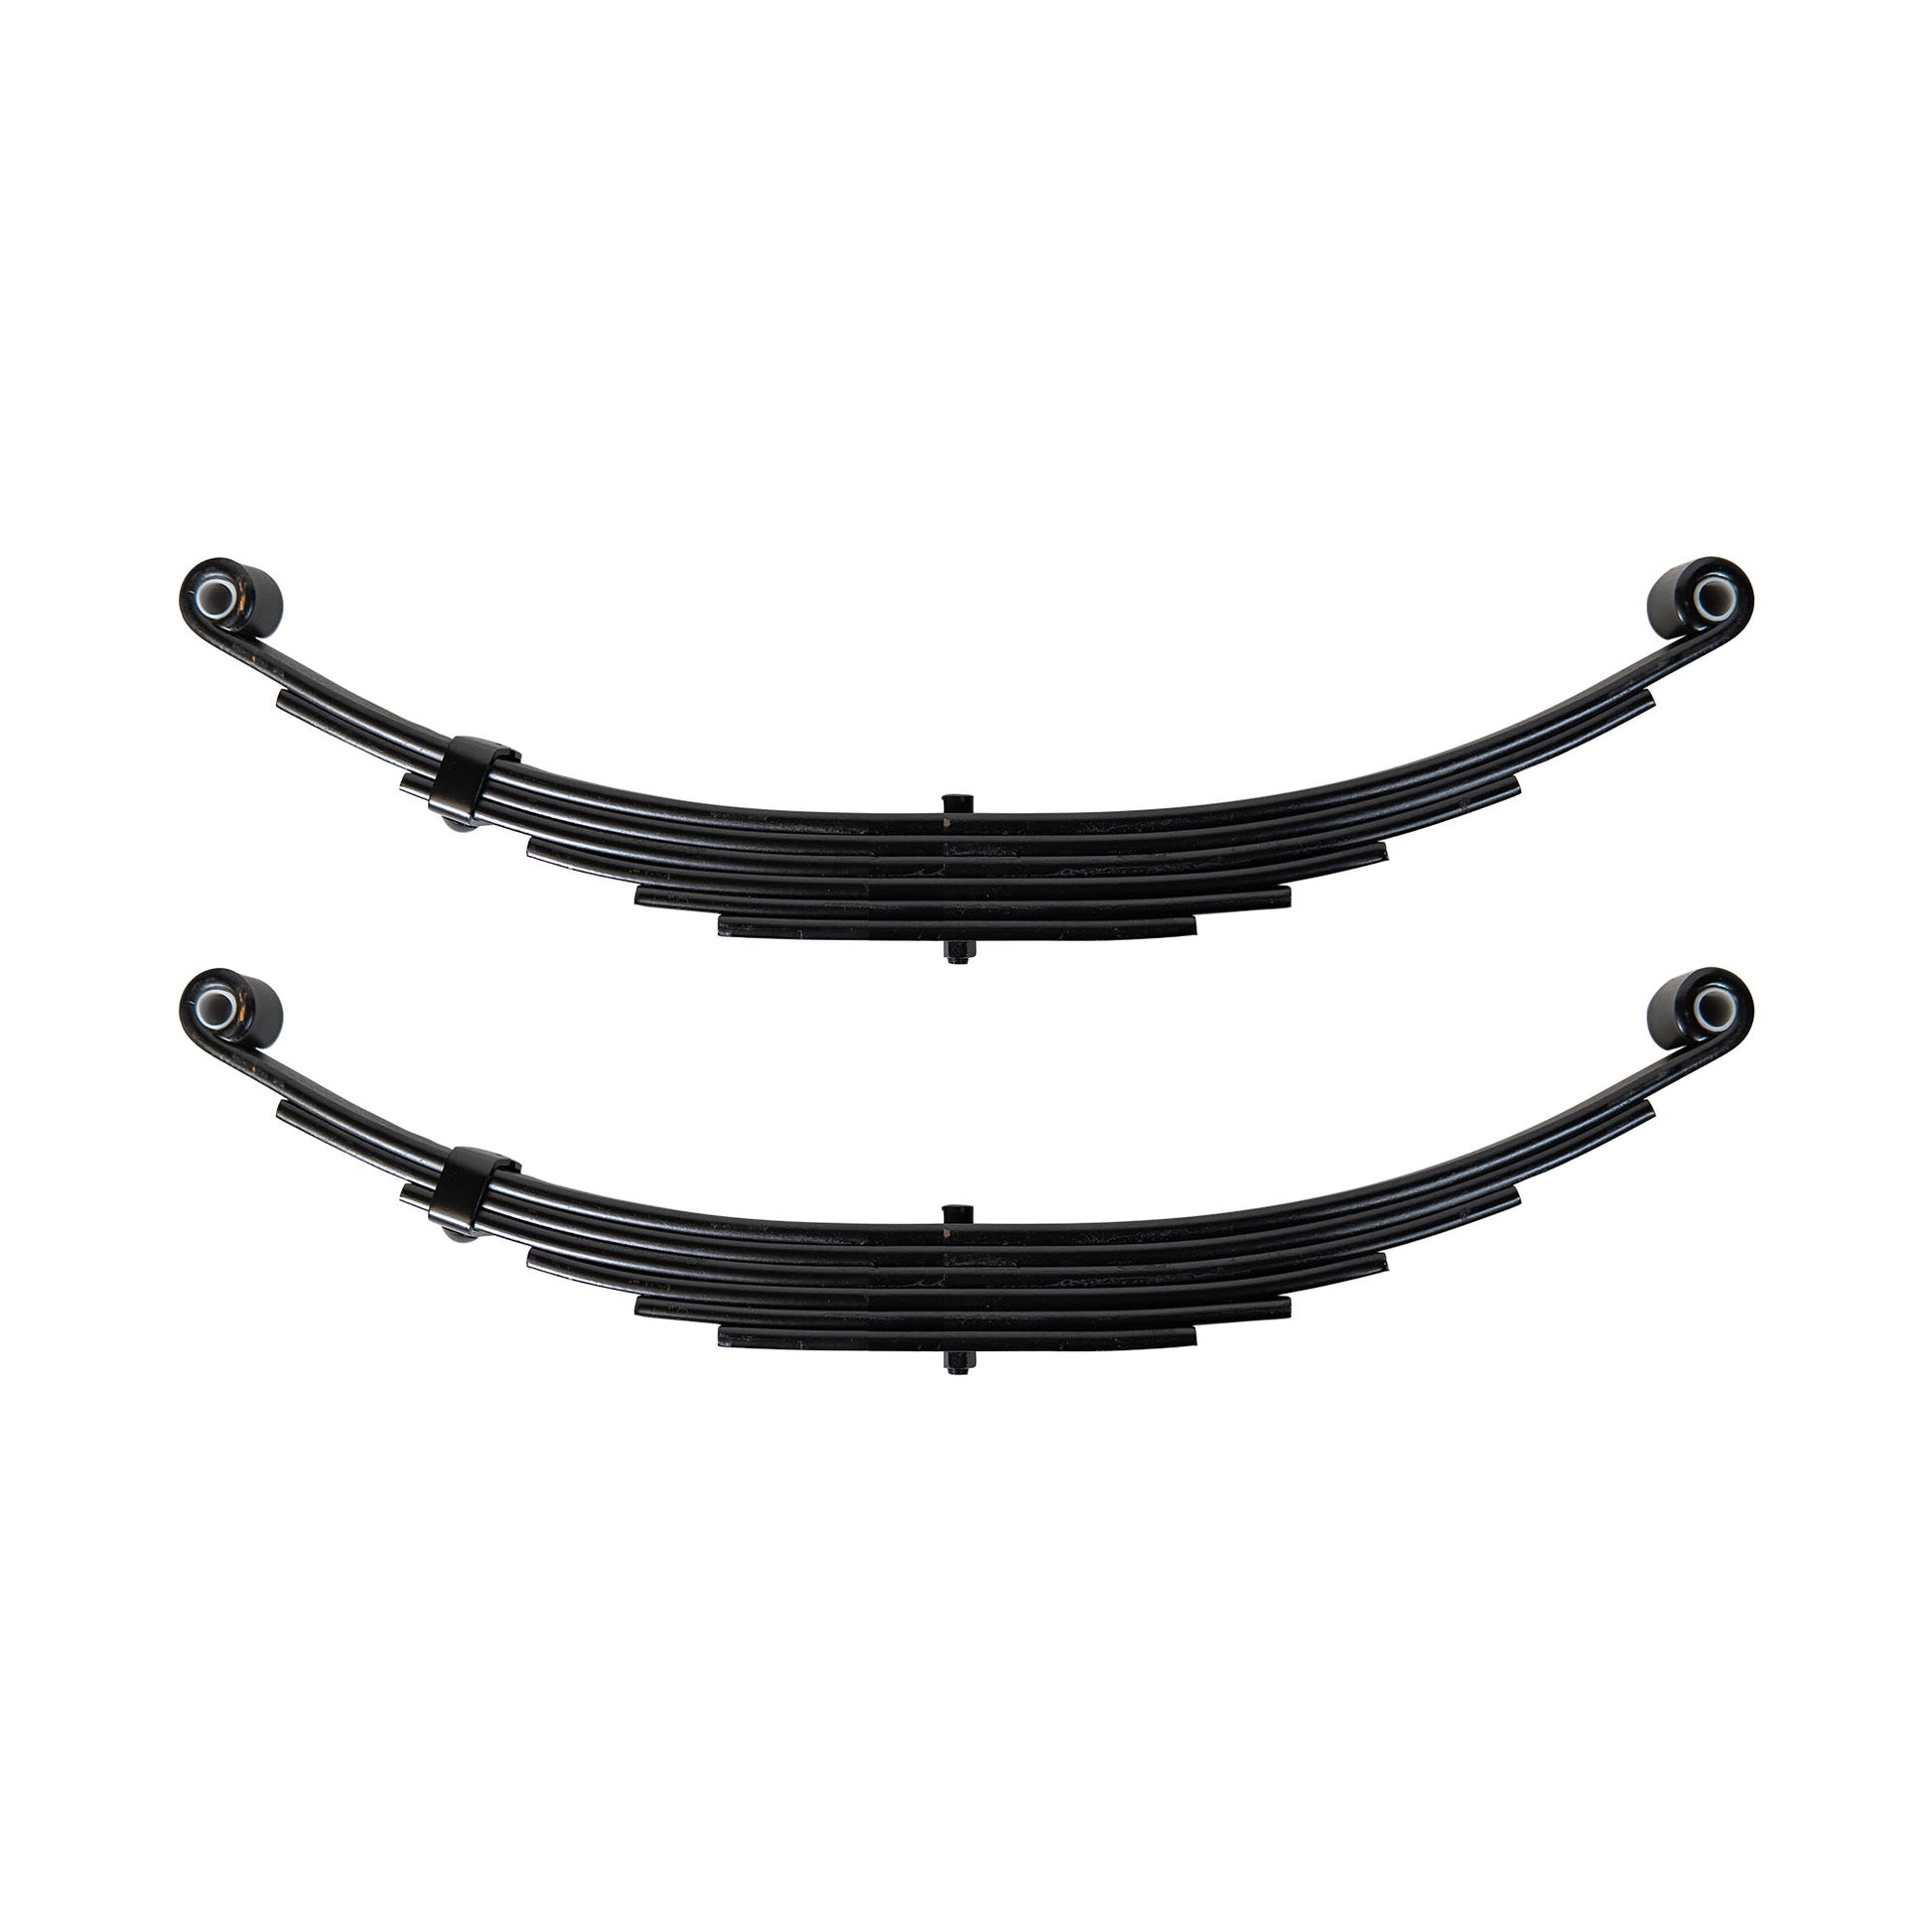 6 Leaf 25 1/4" x 1 3/4" Trailer Double Eye Spring for 7000 lb Axles - The Trailer Parts Outlet